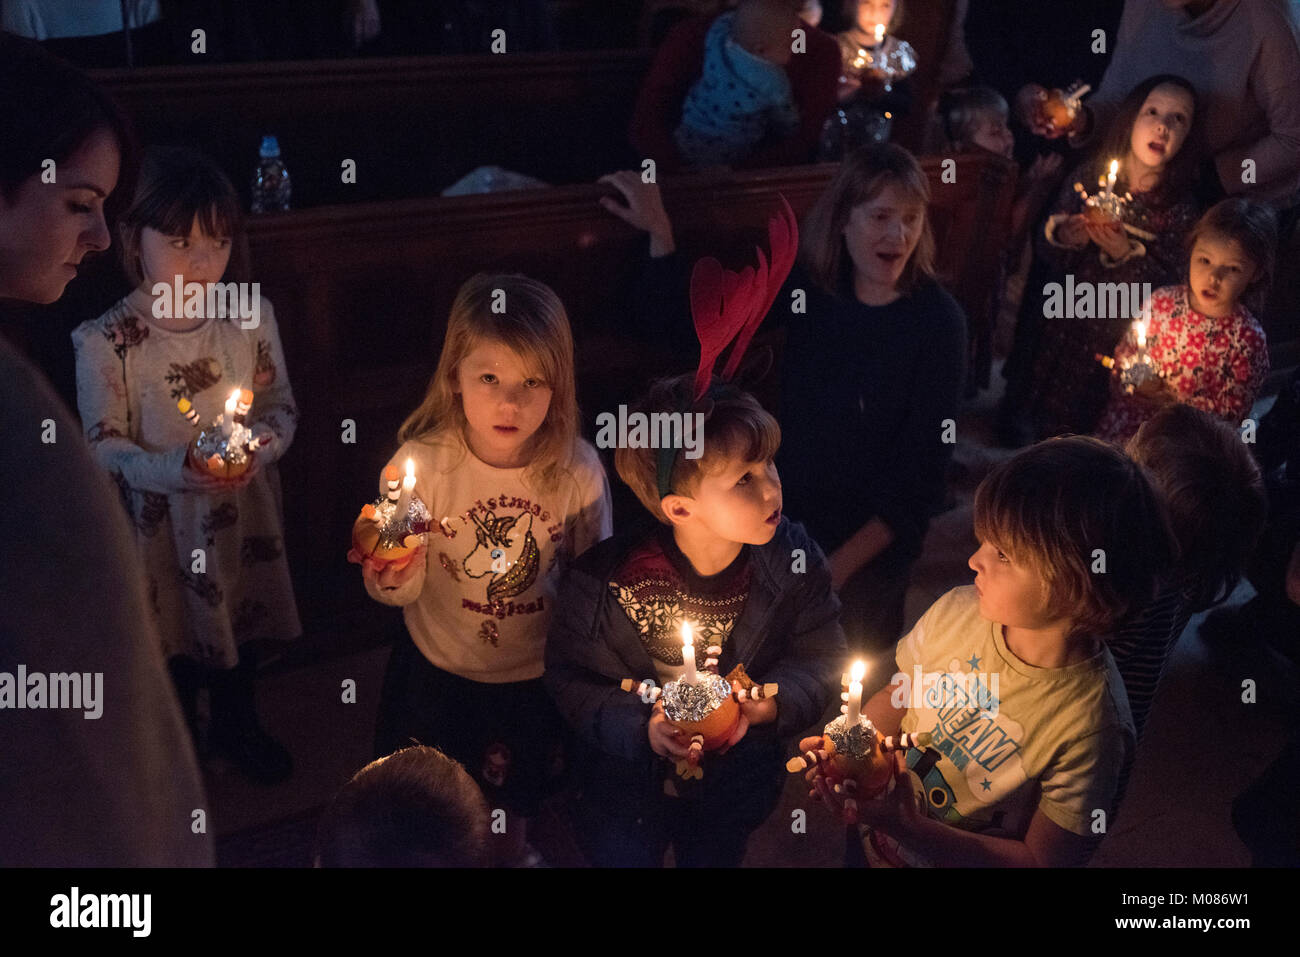 Children process at a Christingle event at St Mary's church Walthamstow, London. Xmas Eve 2017.  A Christingle is a symbolic object used in the Advent services of many Christian denominations. Christingle means 'Christ Light' and is used to celebrate Jesus Christ as the 'Light of the World'. Used primarily for Advent and Christmas, it is also used for Epiphany.  Made uses orange and sweets. Stock Photo